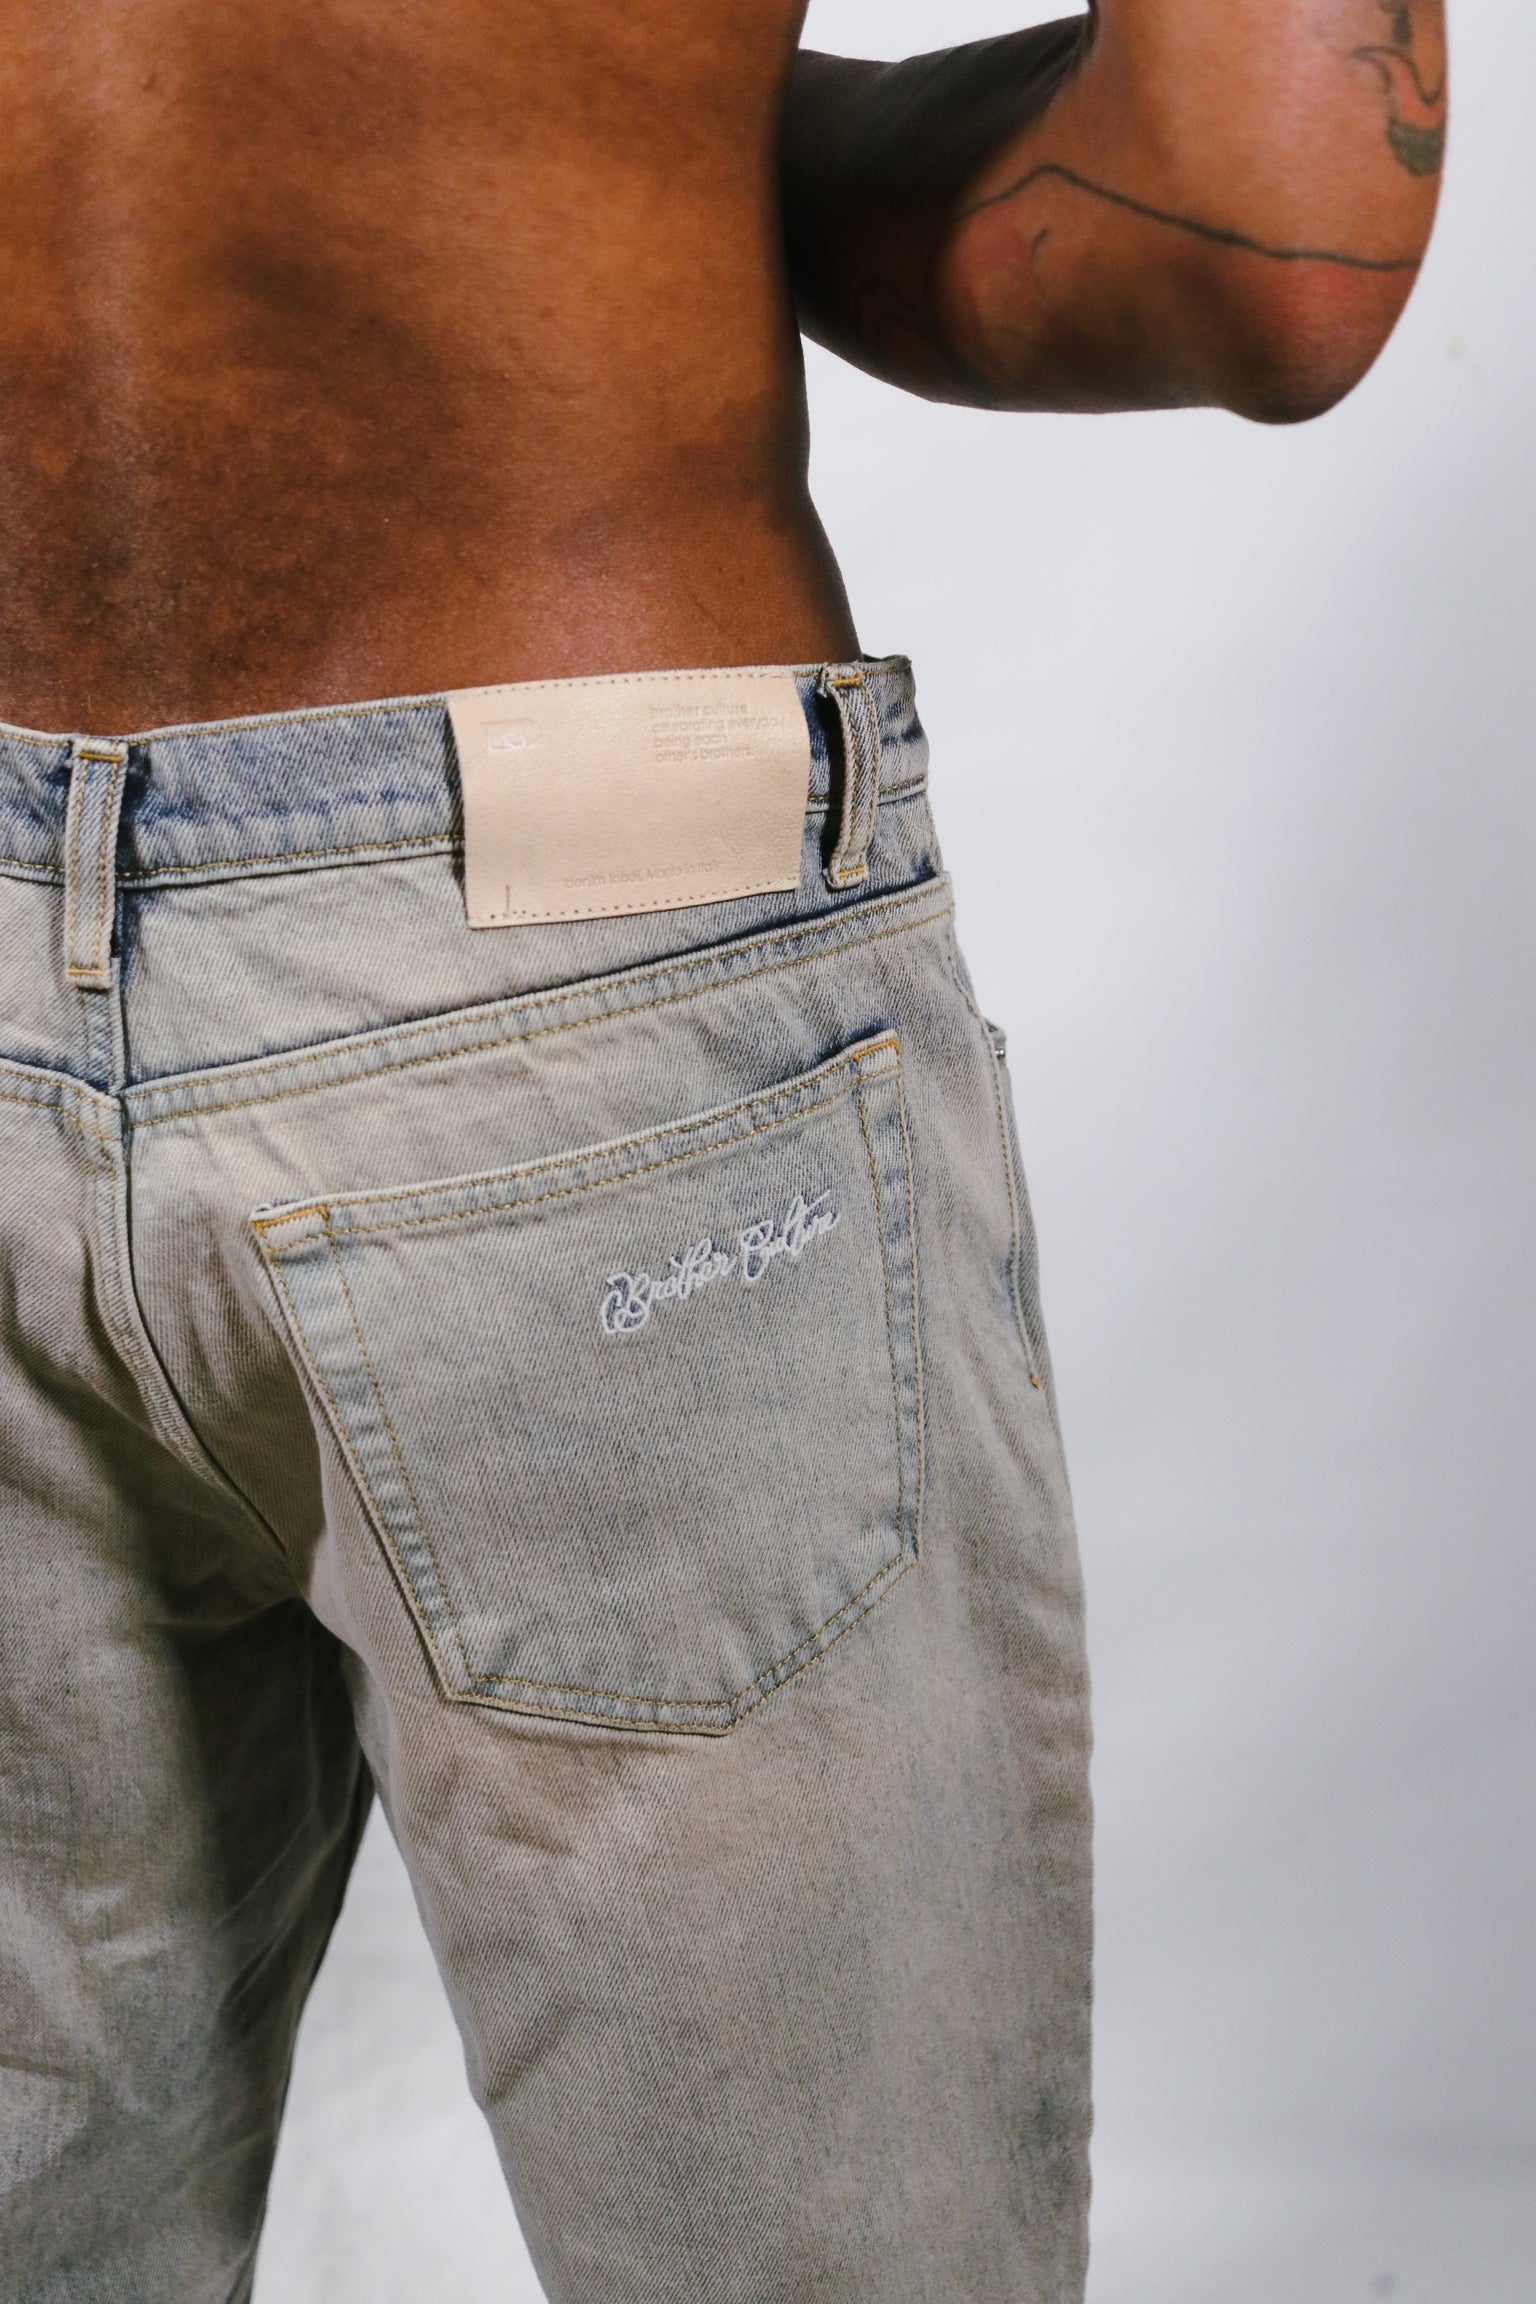 Jeans old beige dyed